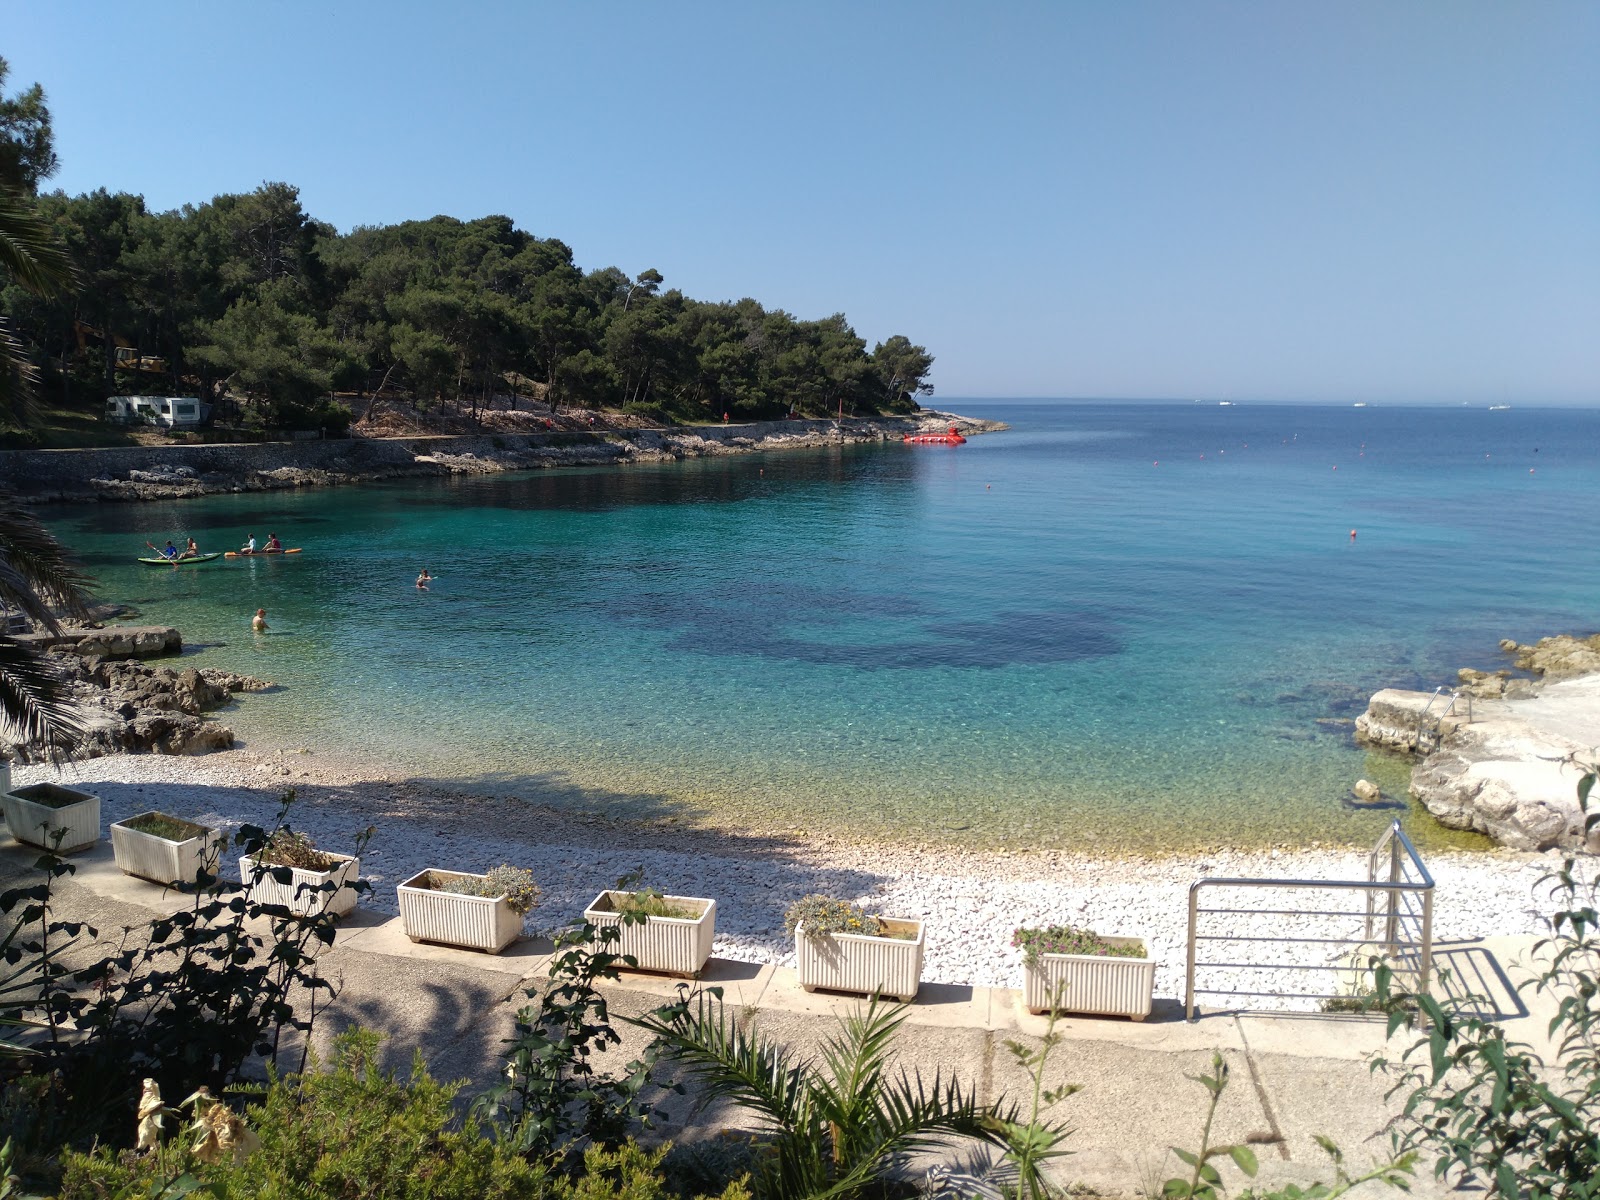 Photo of Mali Losinj with turquoise pure water surface